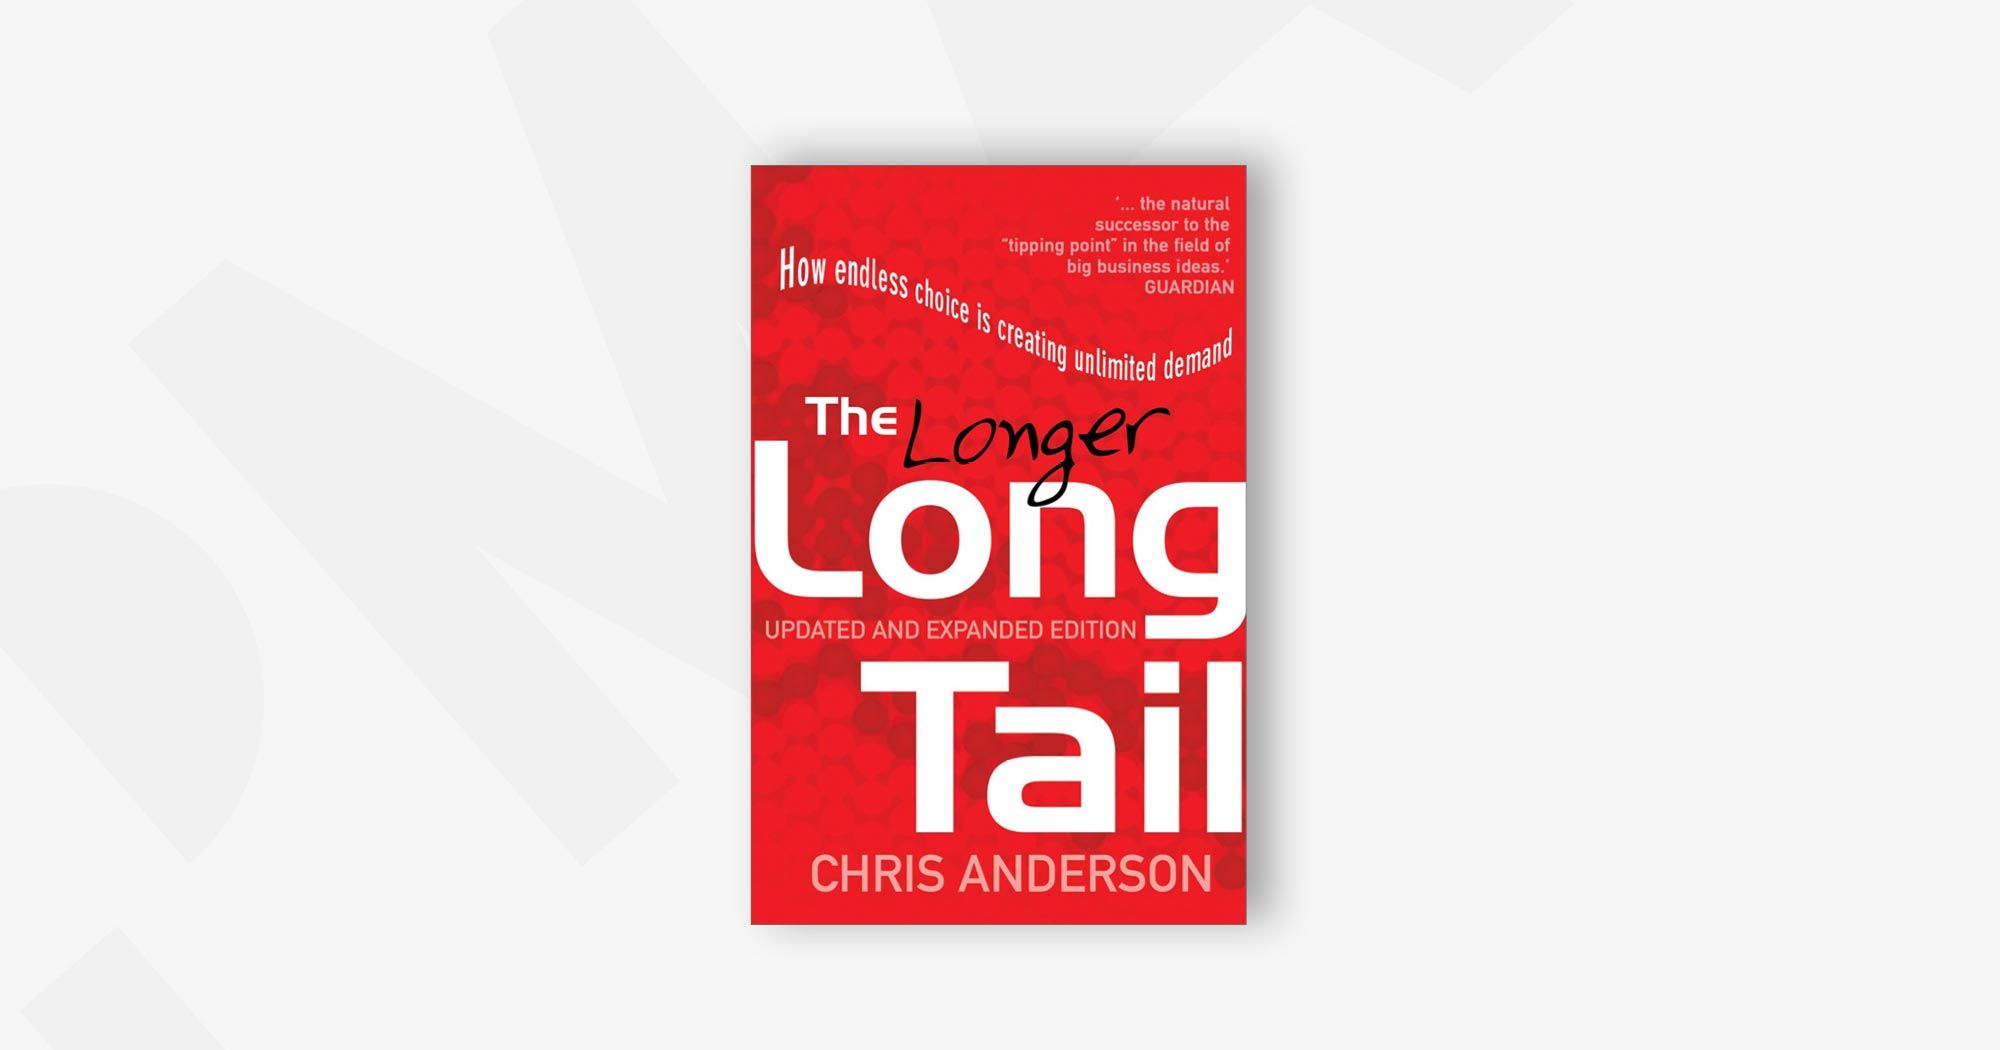 The Longer Long Tail: How Endless Choice is Creating Unlimited Demand – Chris Andersen